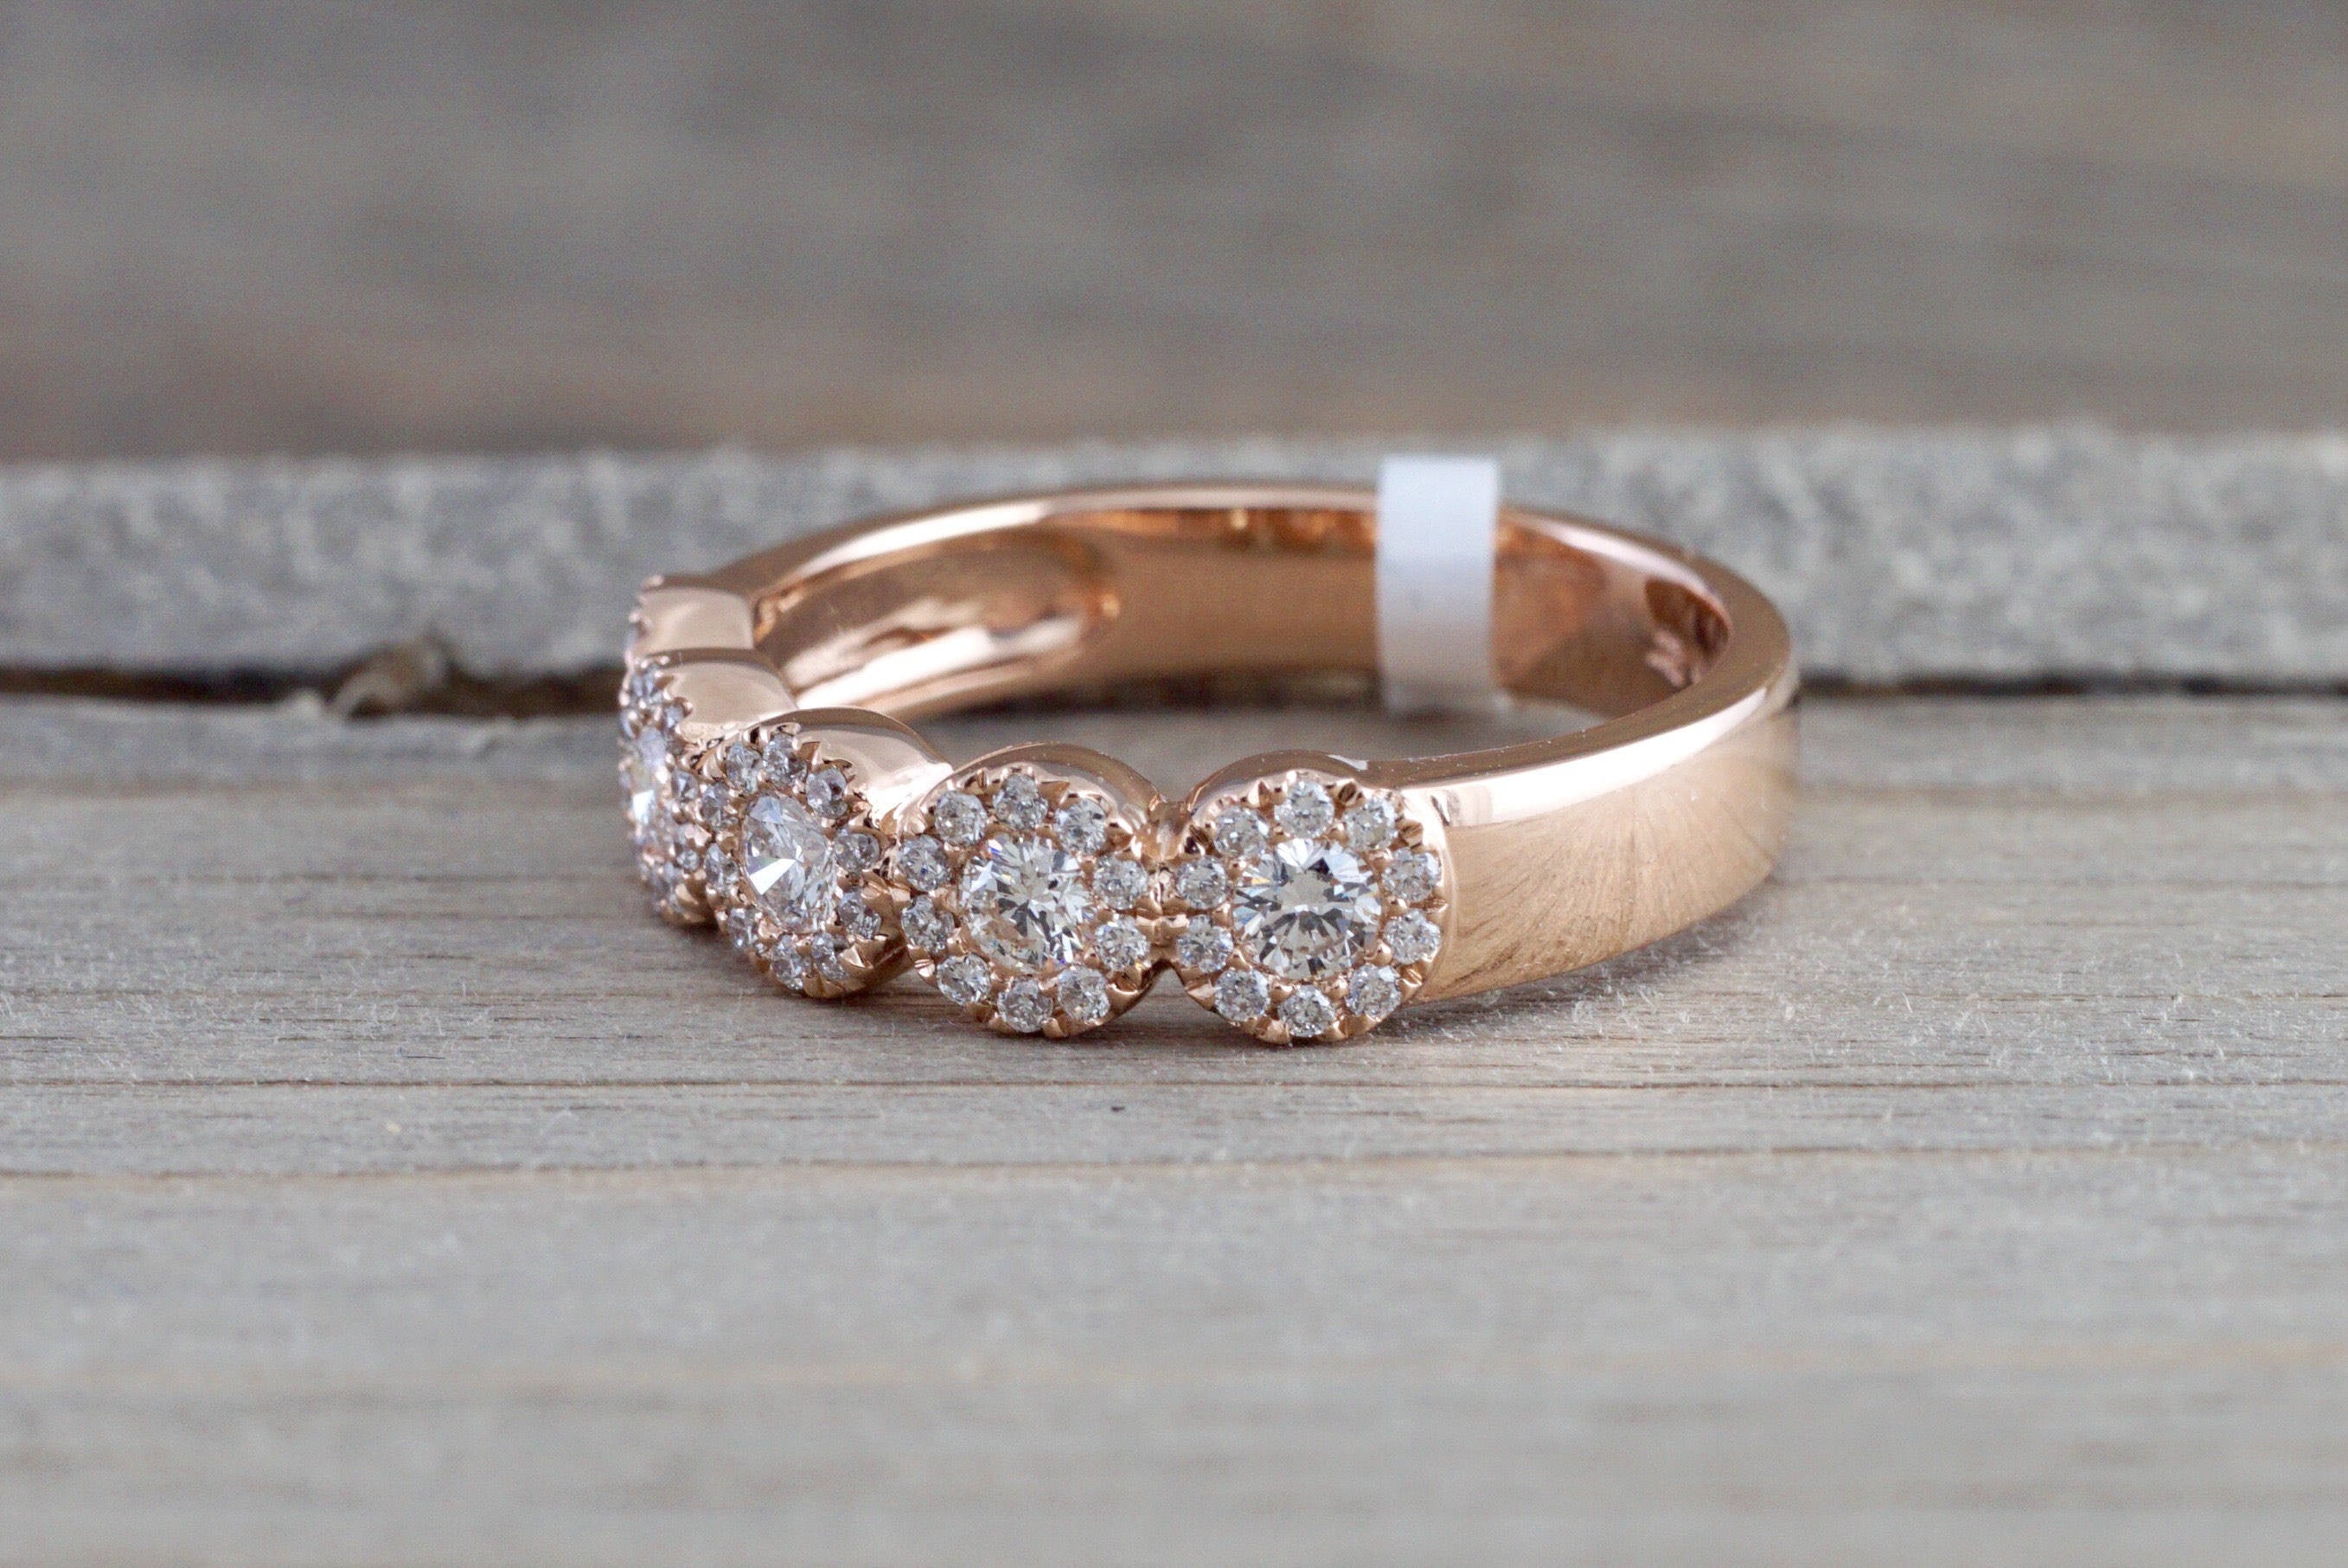 14k Rose Gold 5 diamond Anniversary Five Halo Band Ring Wedding Engagement - Brilliant Facets